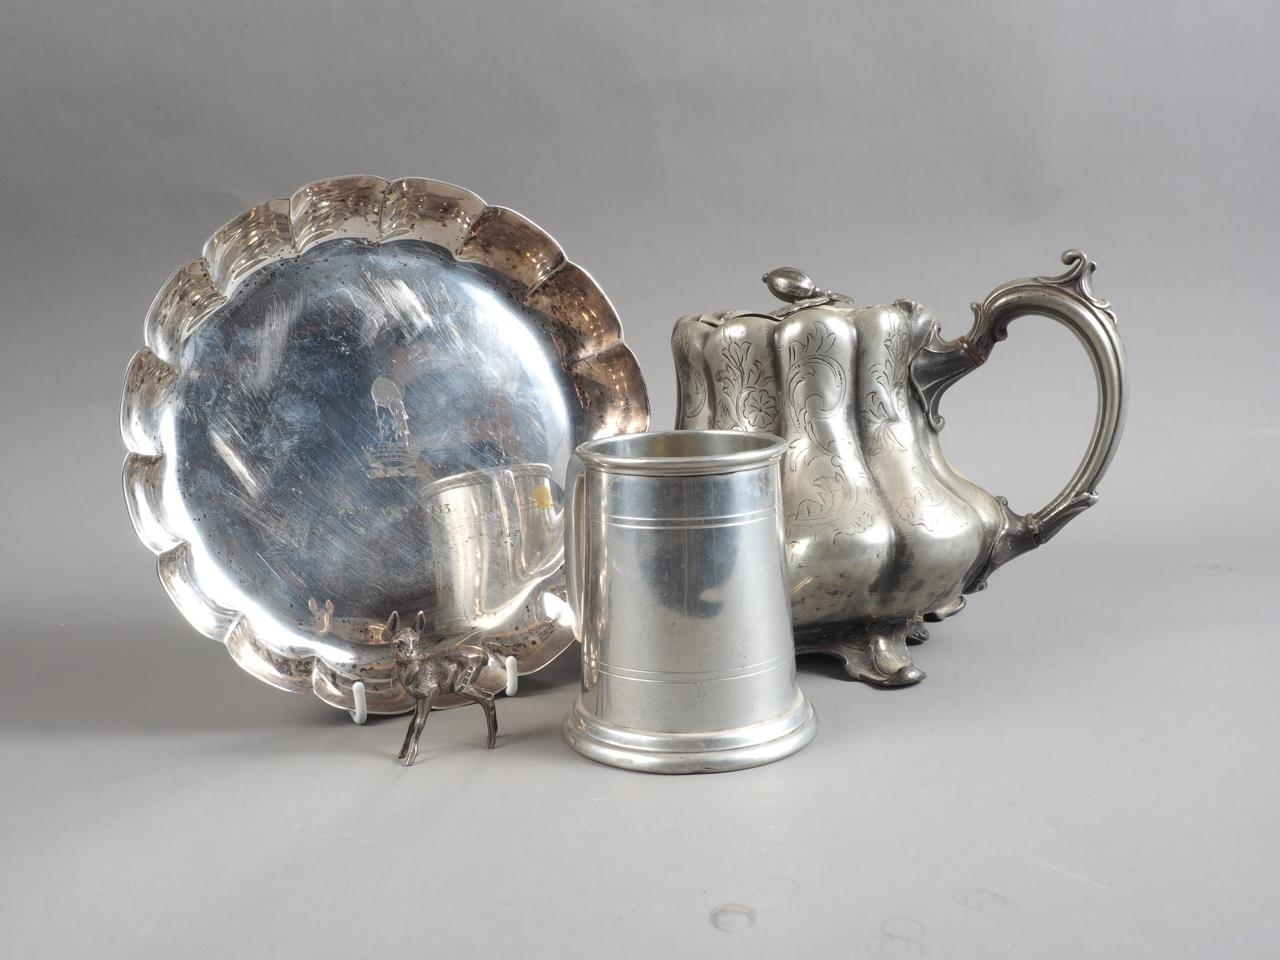 A silver model of a fawn, a silver plated lobed dish, a pewter teapot and a pewter half pint tankard